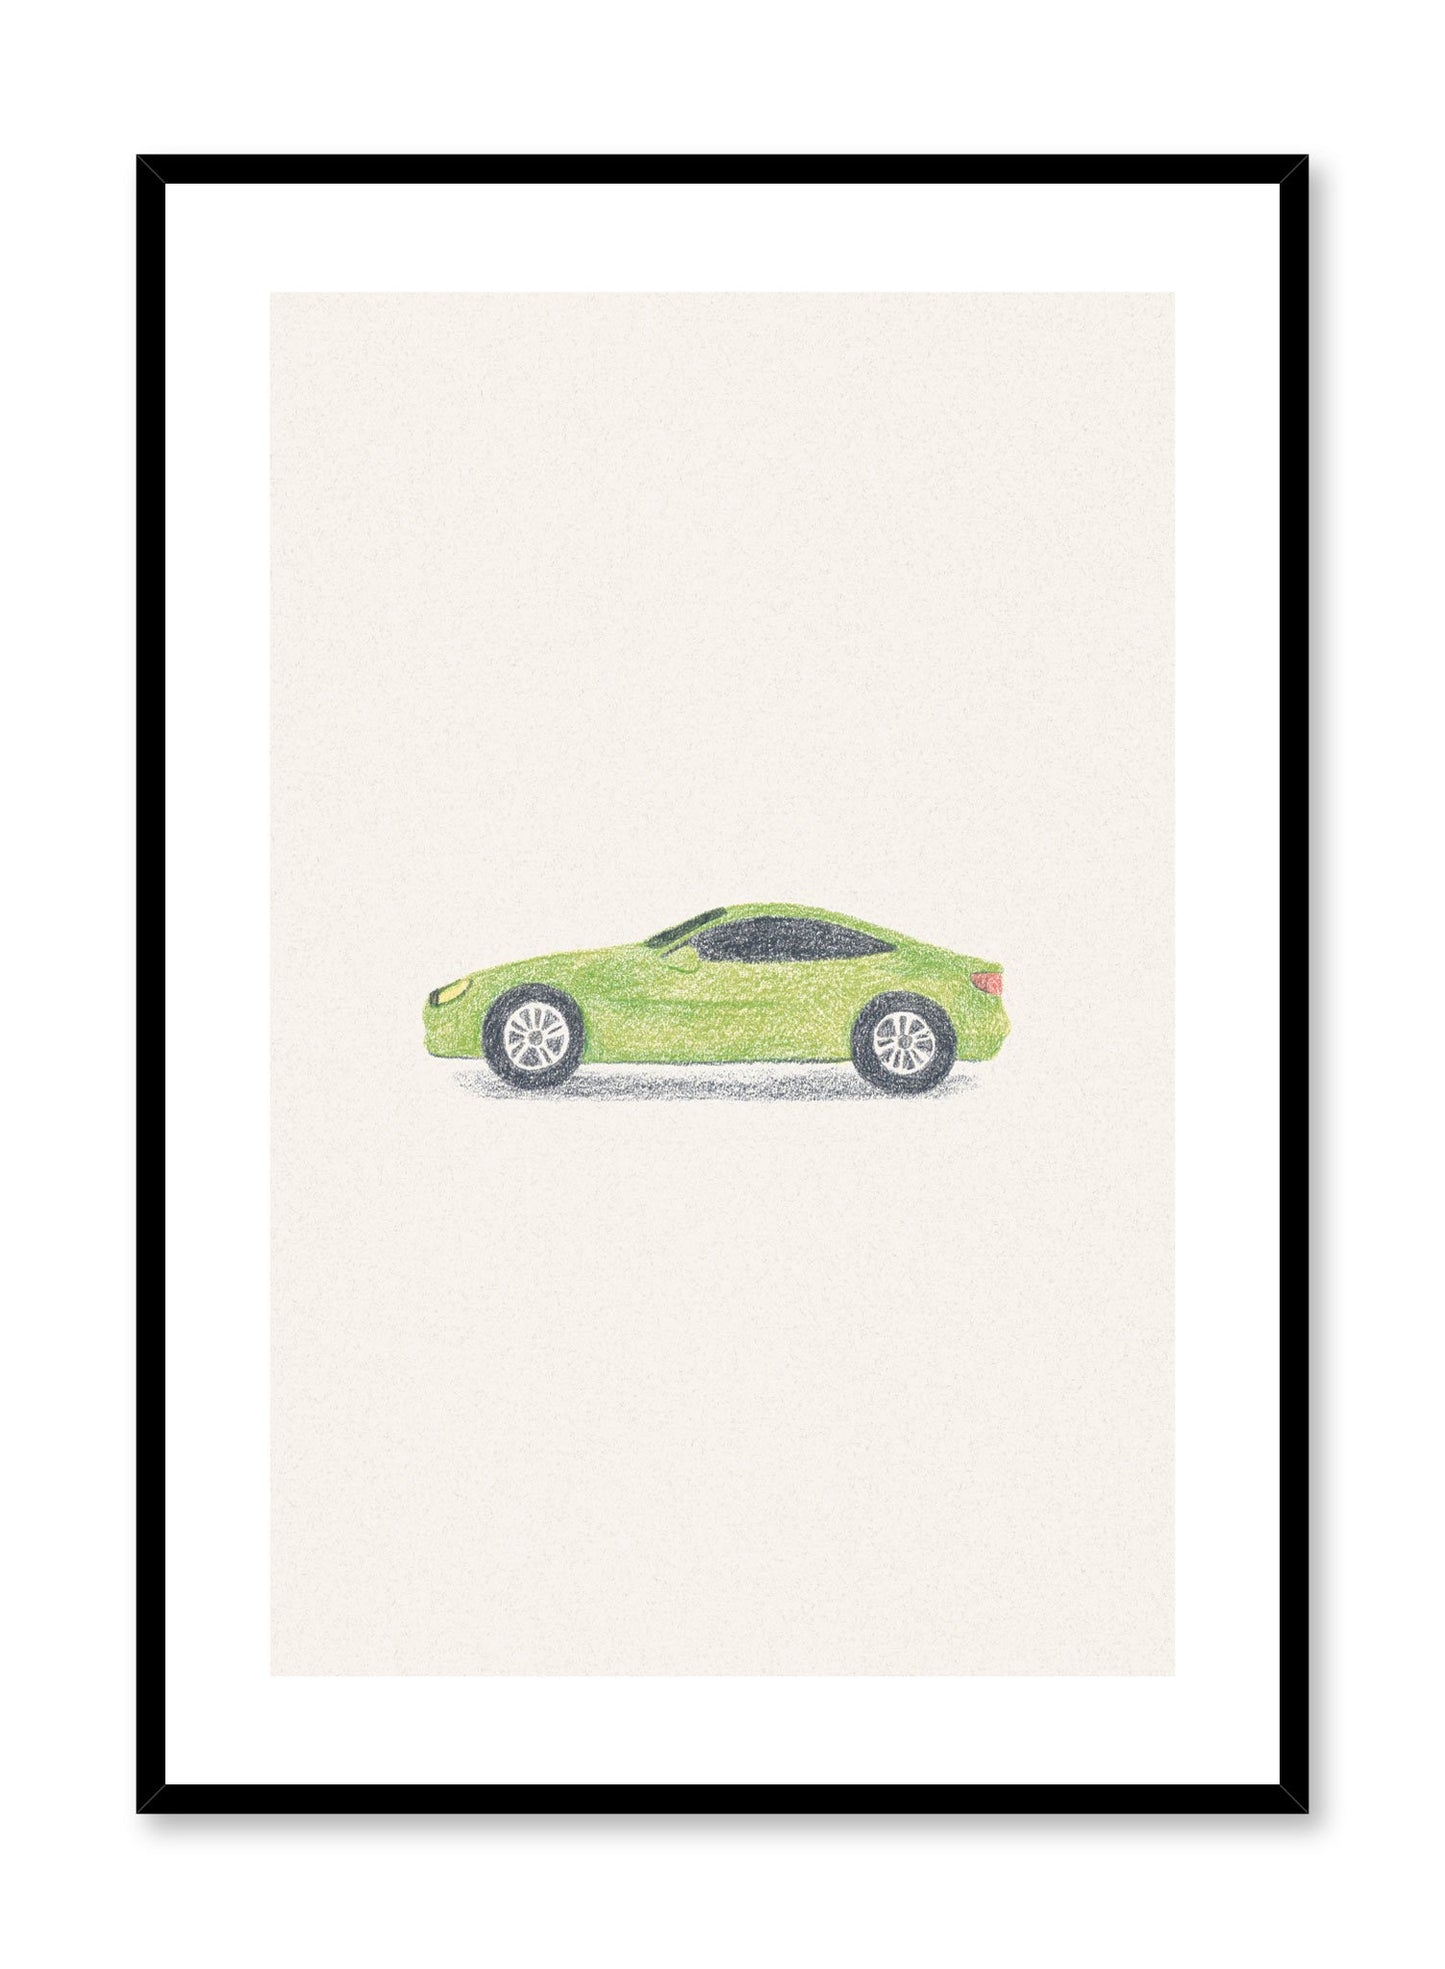 Hot Wheels is a minimalist illustration by Opposite Wall of a green toy sports car.